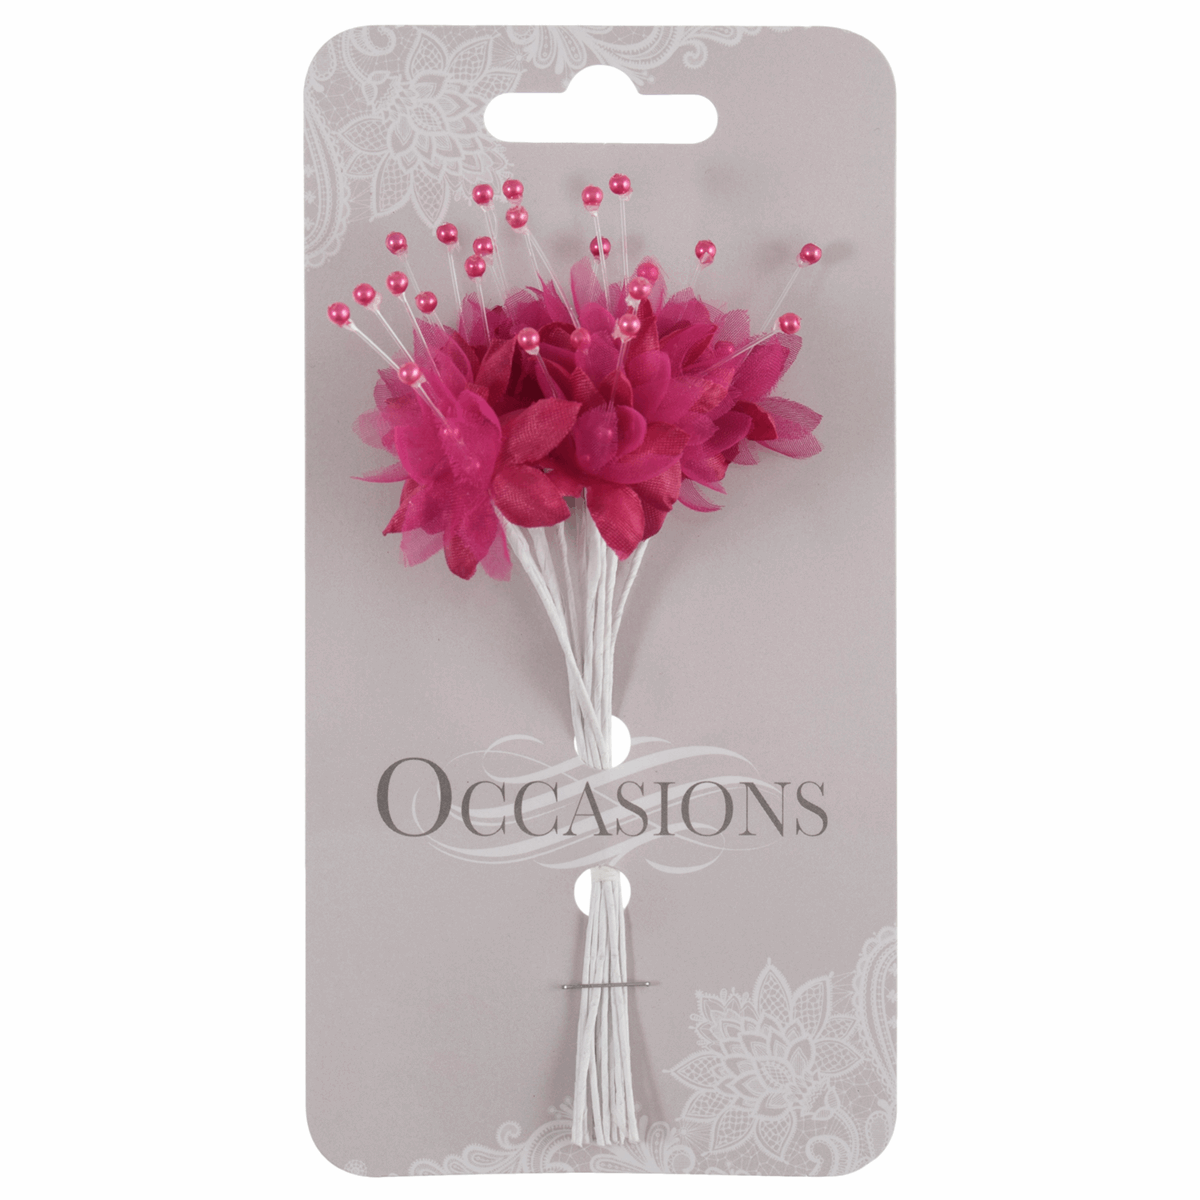 Hot Pink Babys Breath Artificial Flower Stems with Pearls (Pack of 12 Stems)